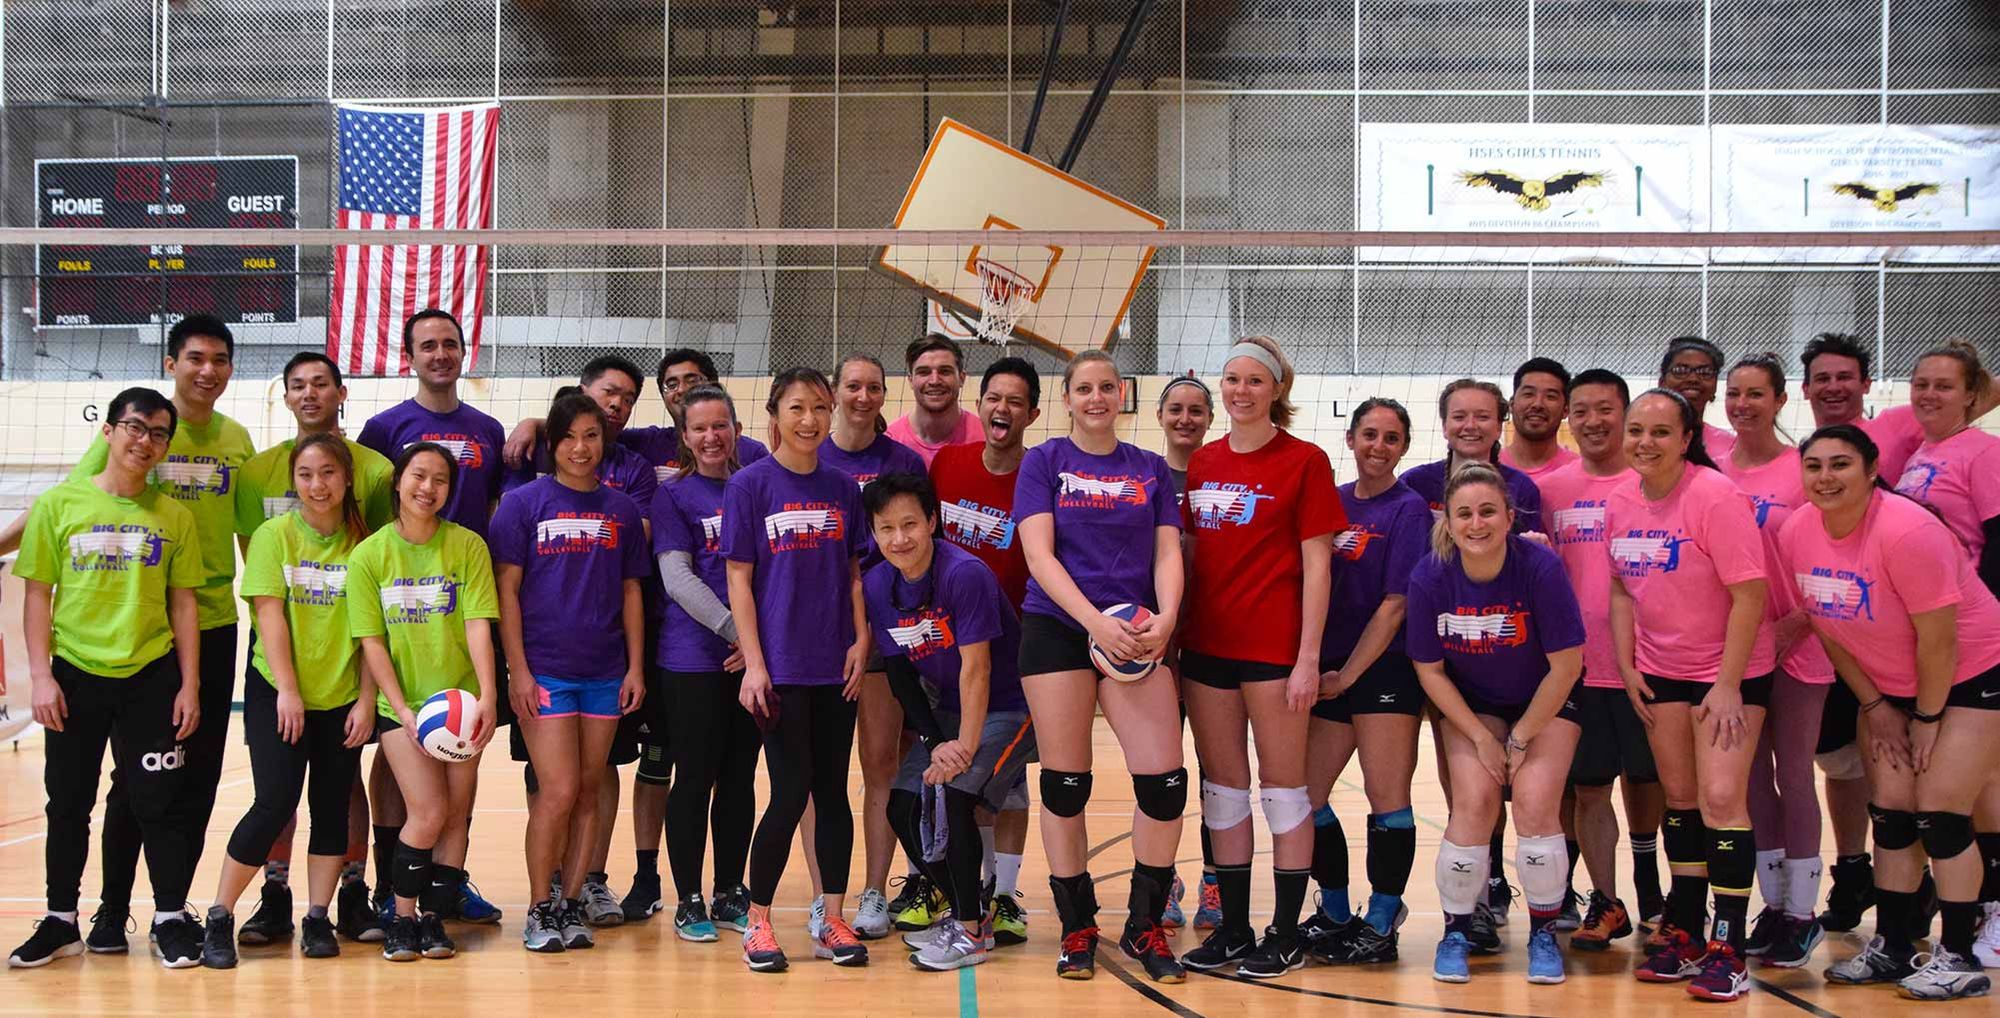 Adult Classes  Big City Volleyball